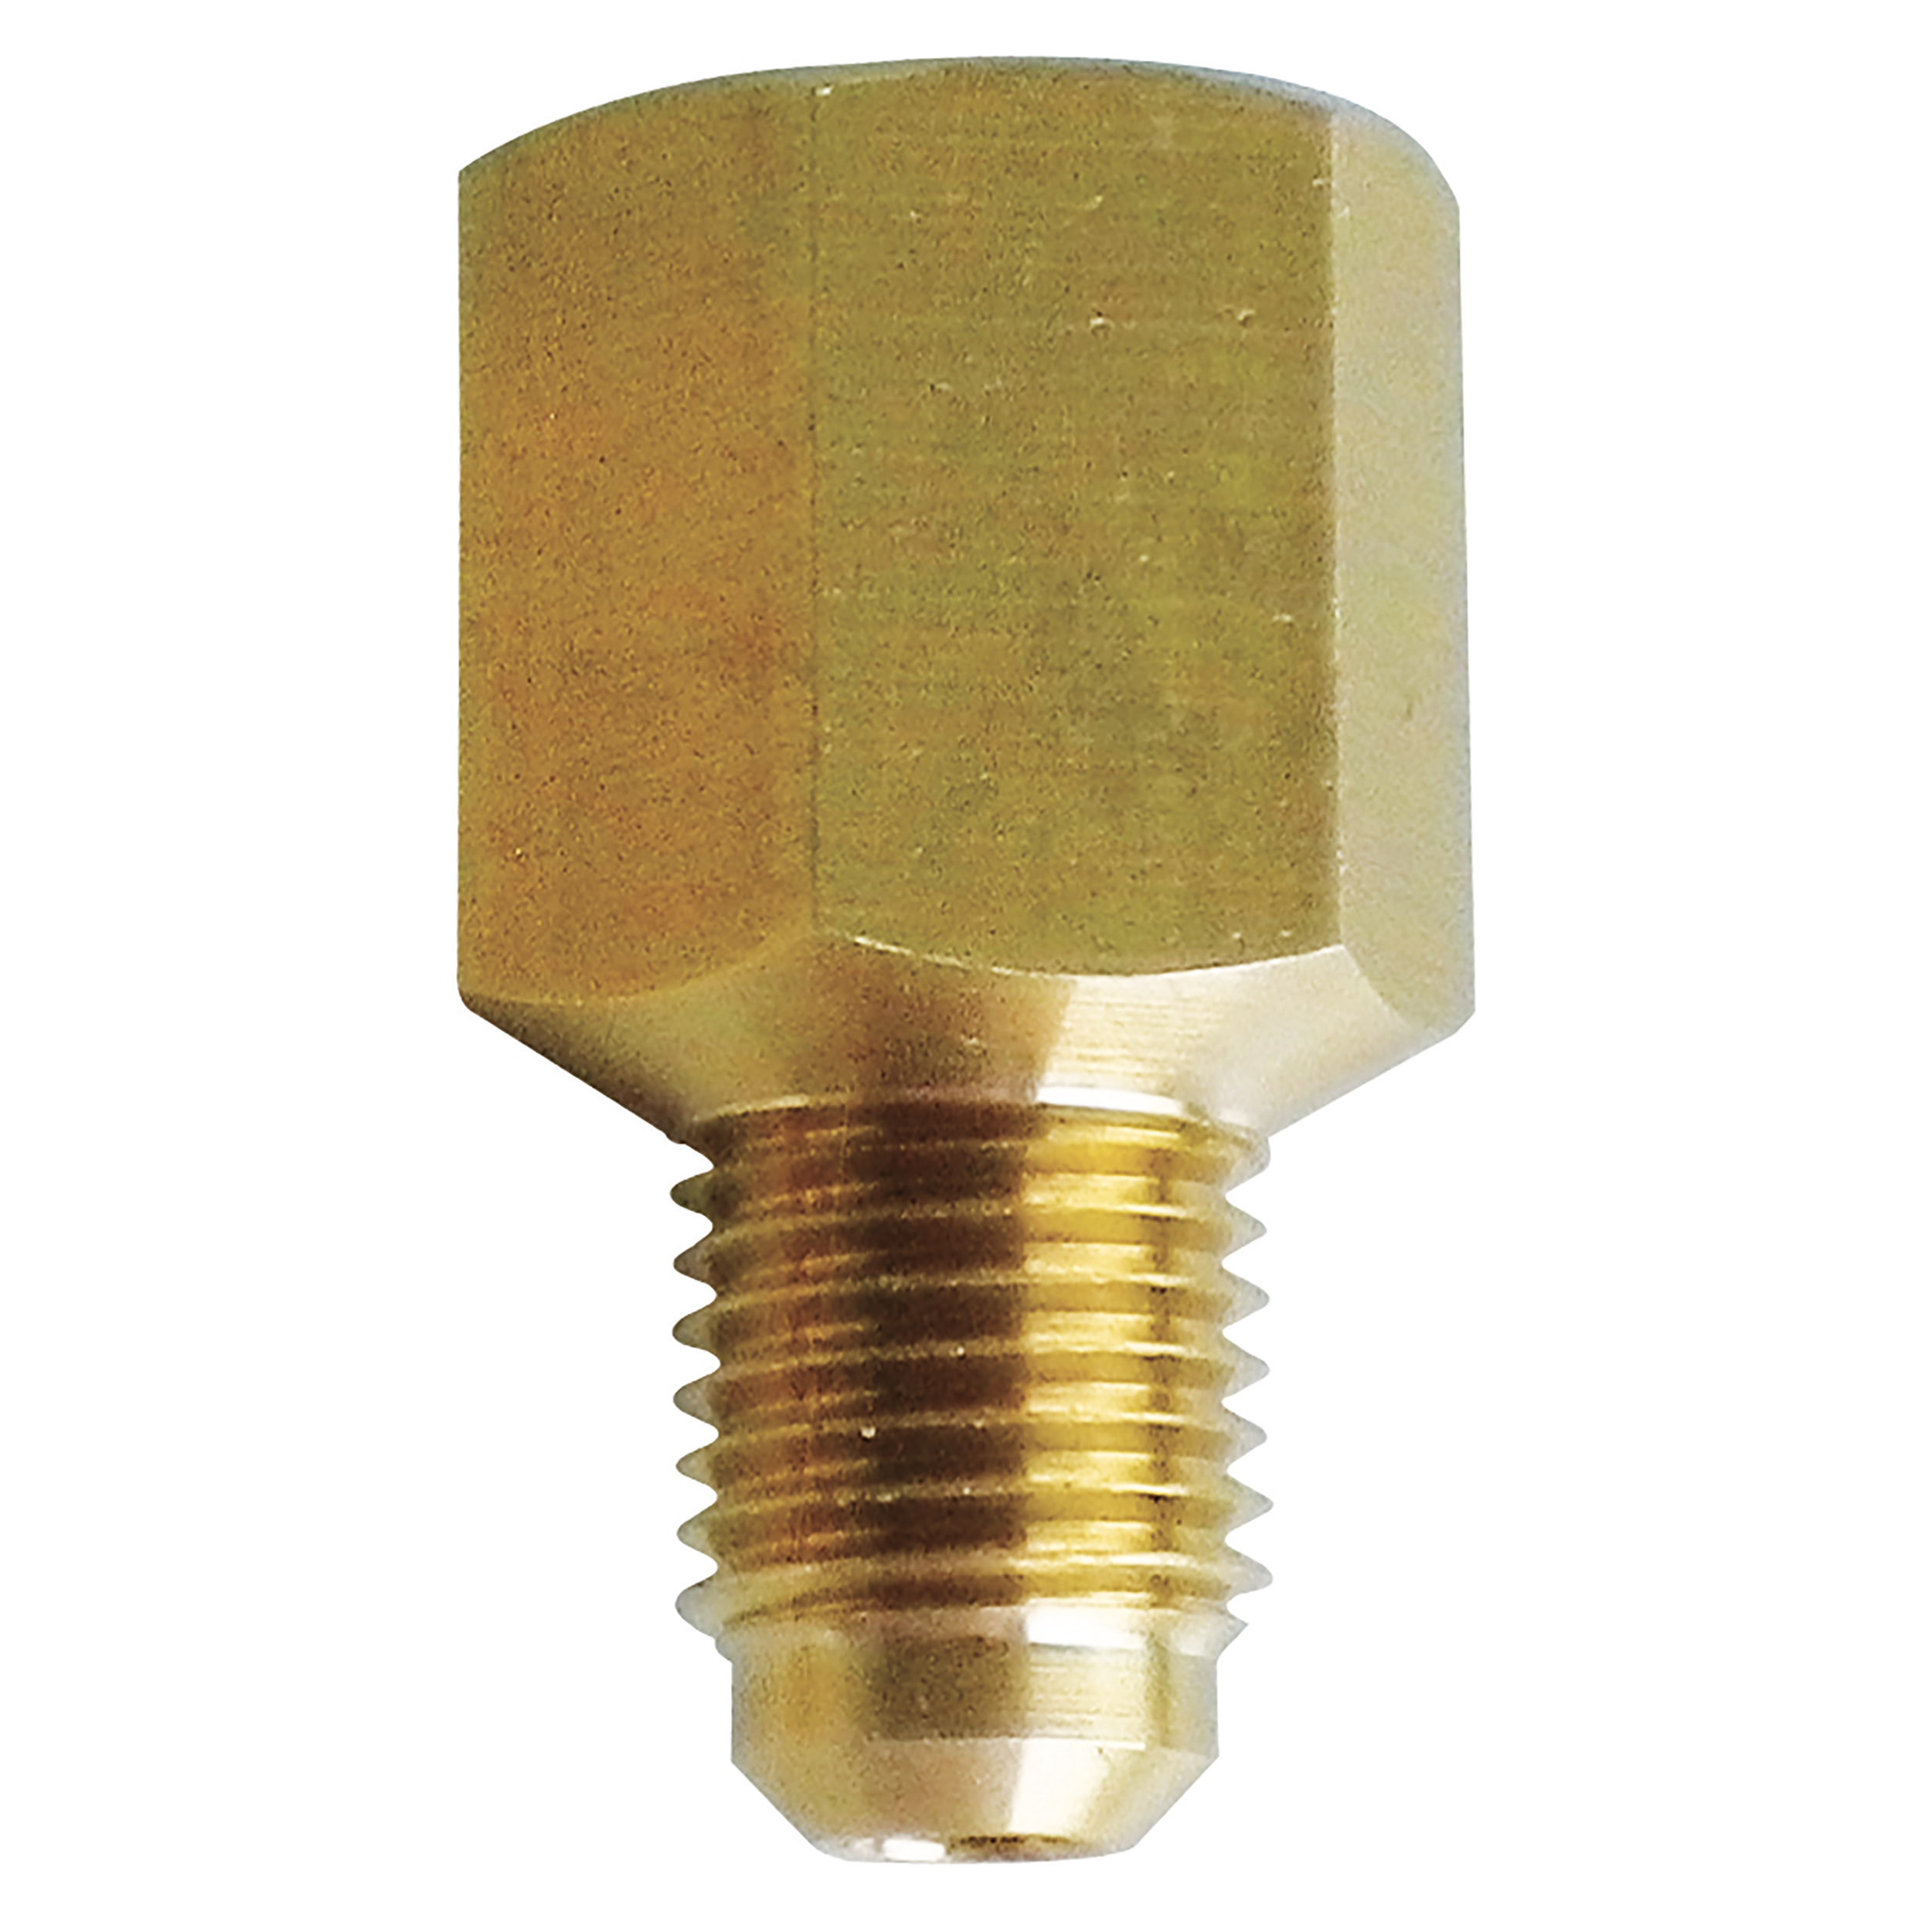 Adaptor climate-service nitrogen inner and outer thread right hand